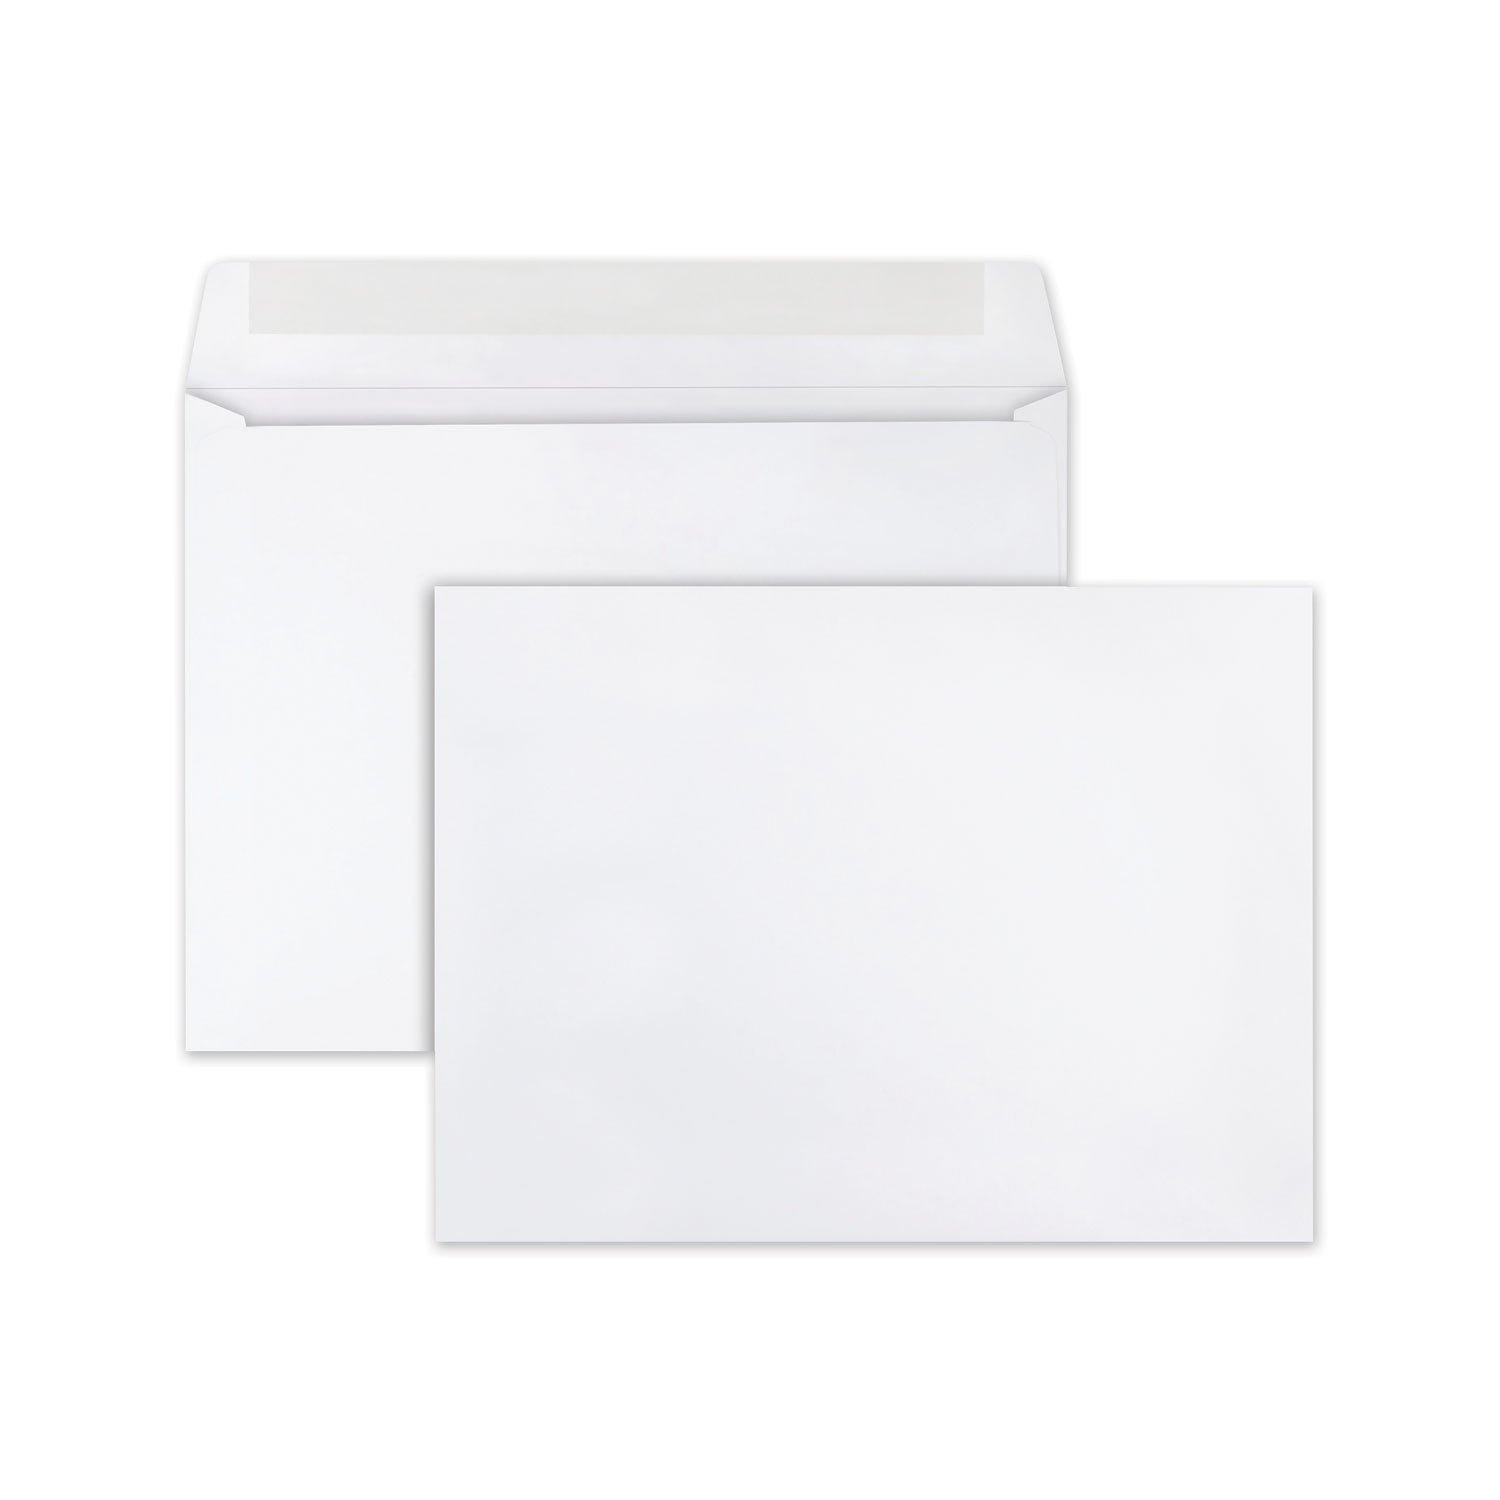 Open-Side Booklet Envelope, #10 1/2, Cheese Blade Flap, Gummed Closure, 9 x 12, White, 250/Box - 